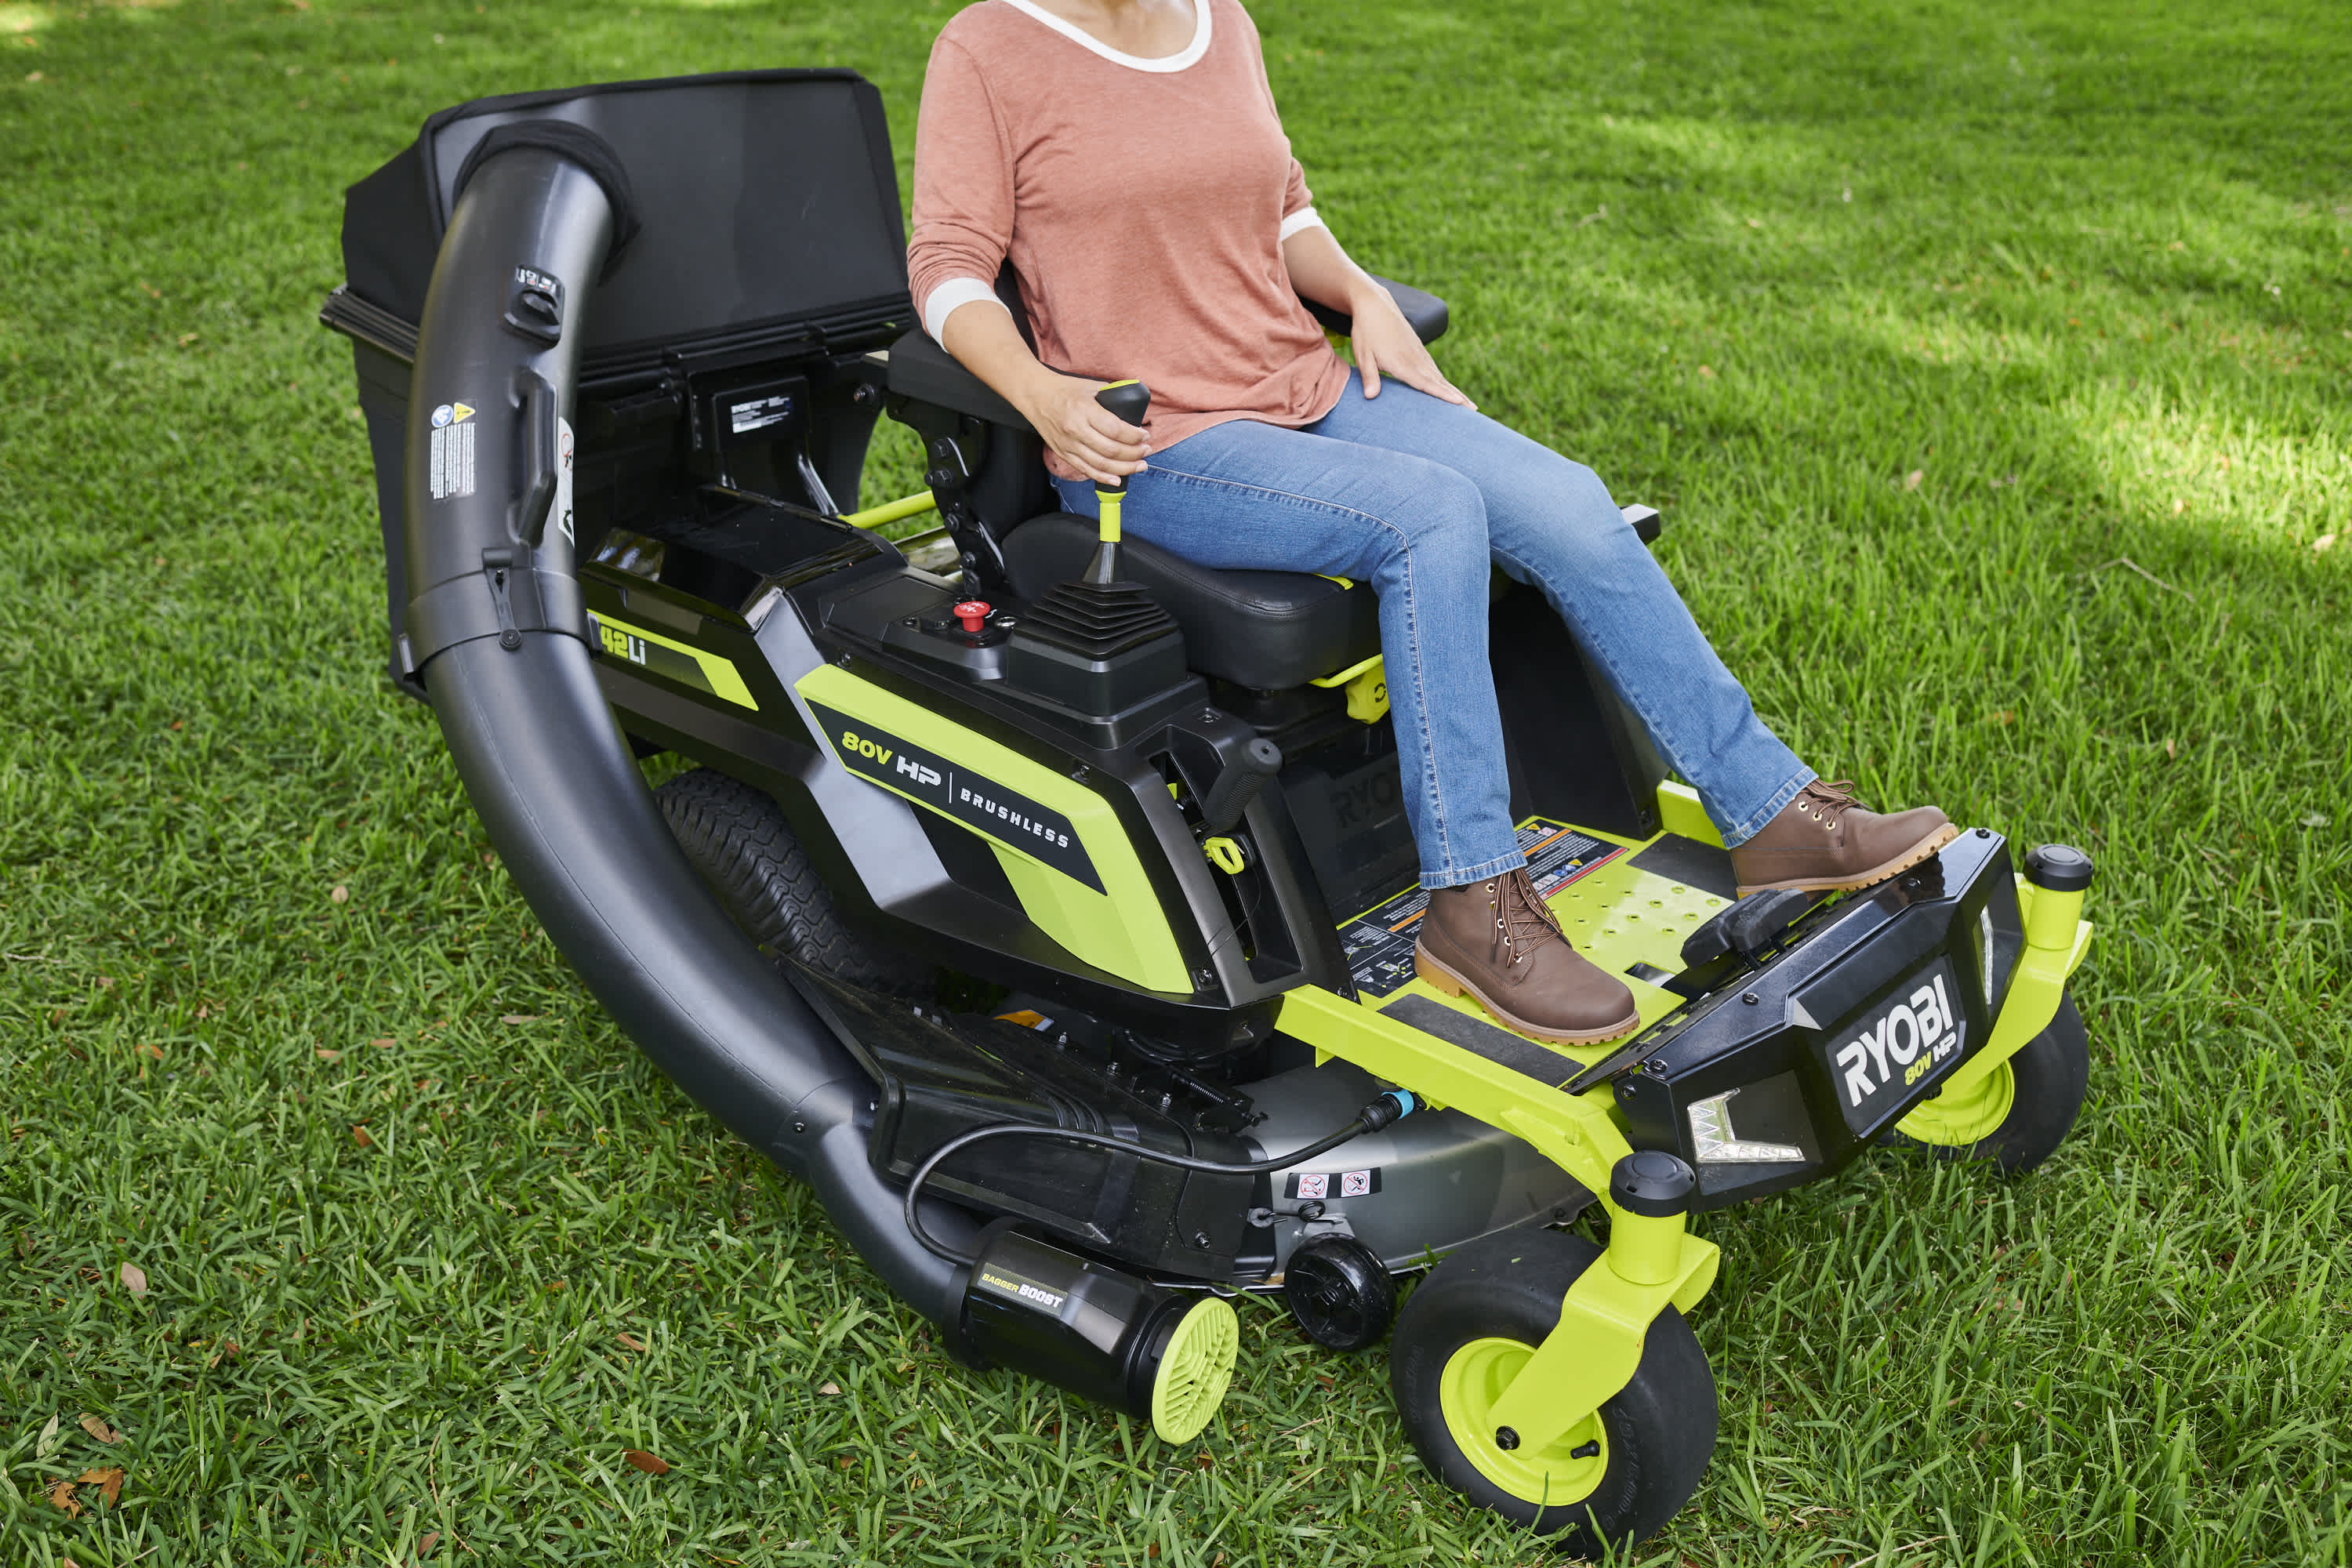 Product Features Image for 80V HP BRUSHLESS 42" LITHIUM ELECTRIC ZERO TURN RIDING MOWER.